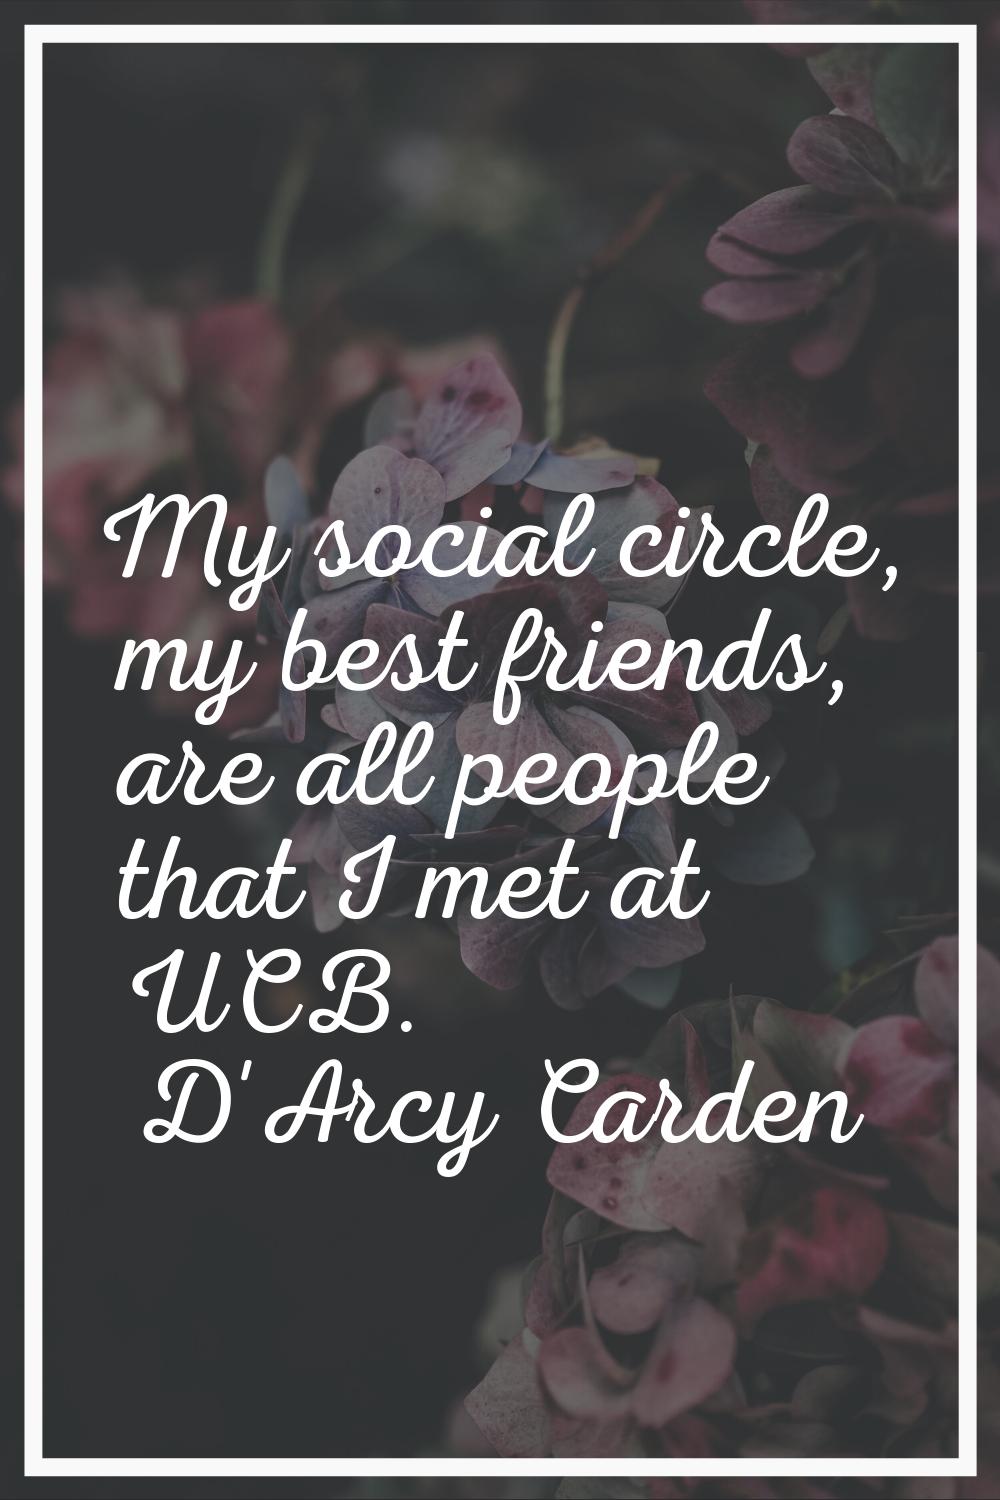 My social circle, my best friends, are all people that I met at UCB.